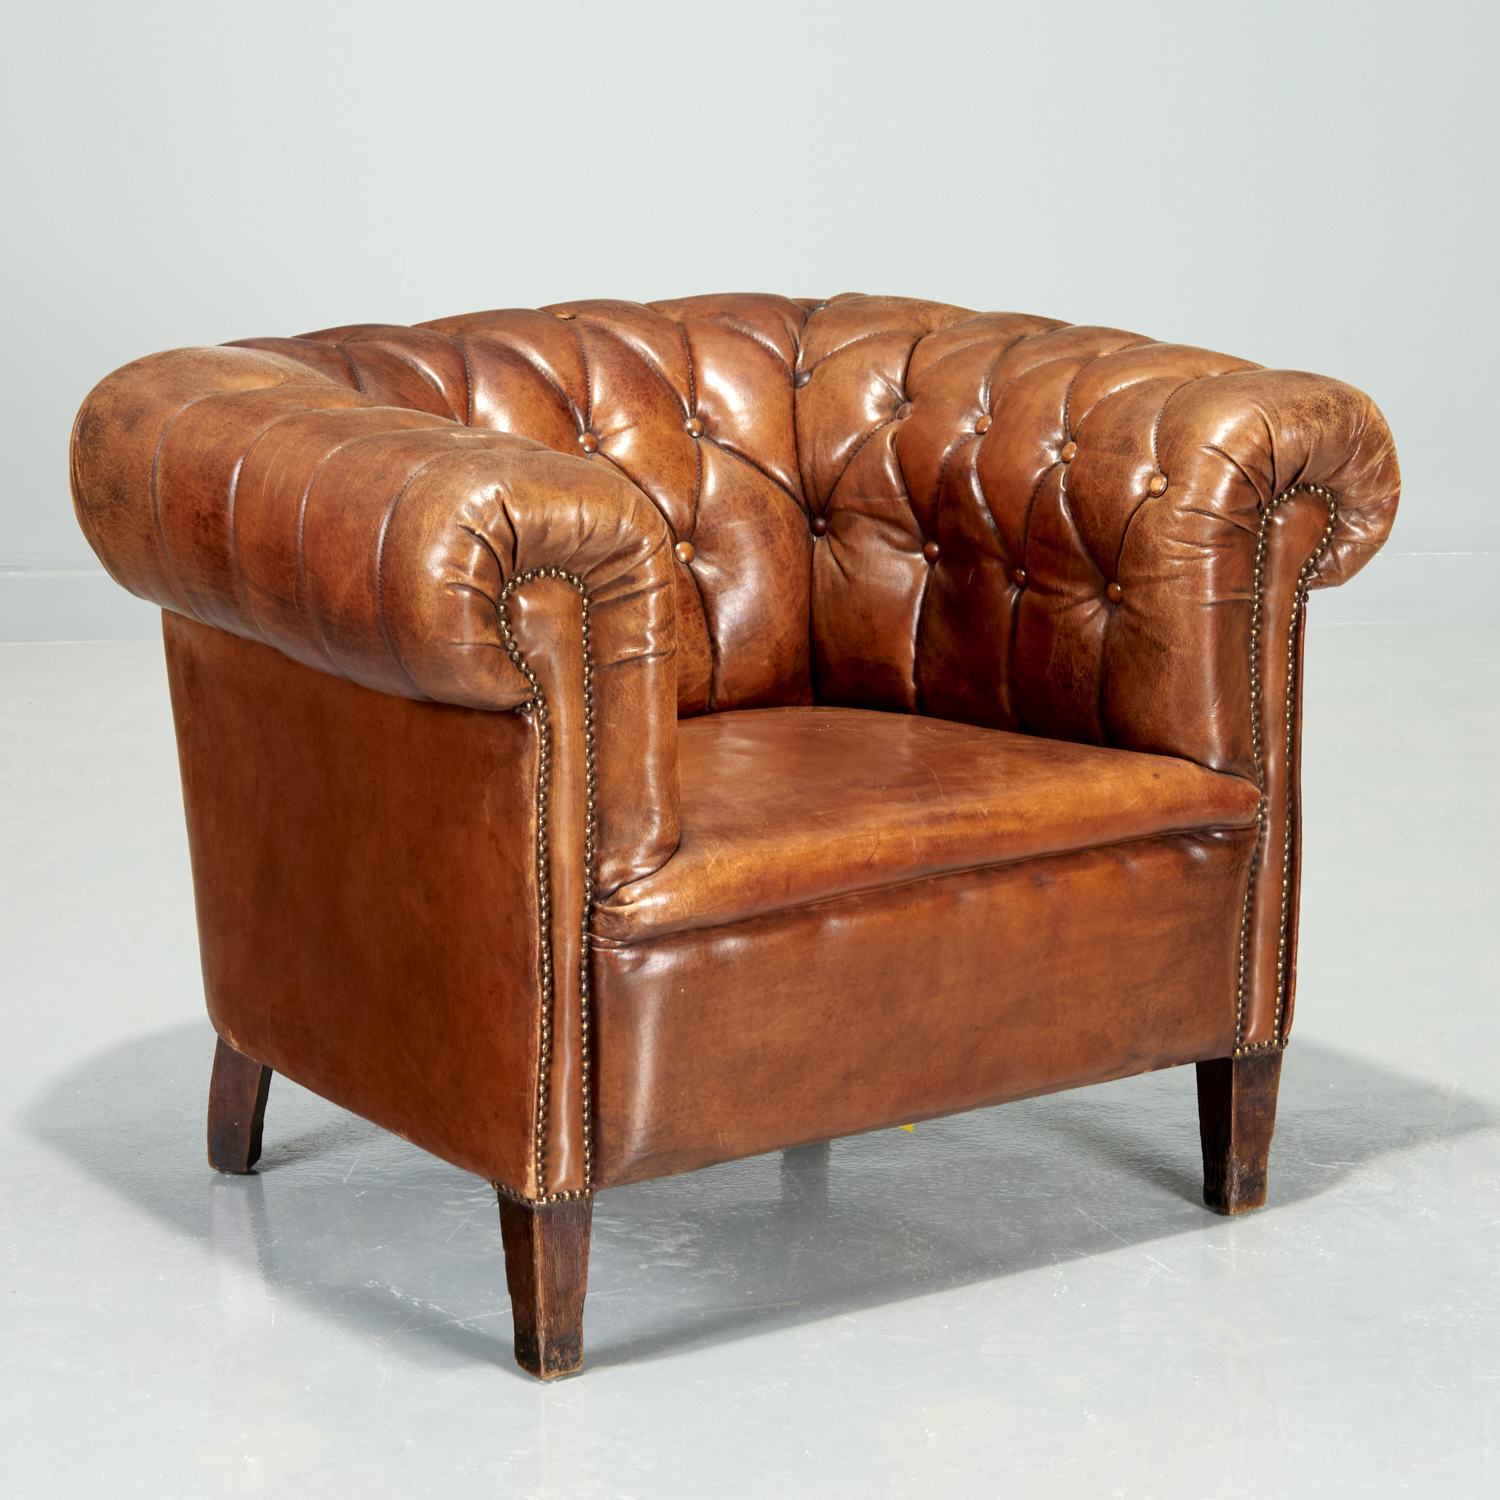 EDWARDIAN LEATHER CHESTERFIELD 360ed1